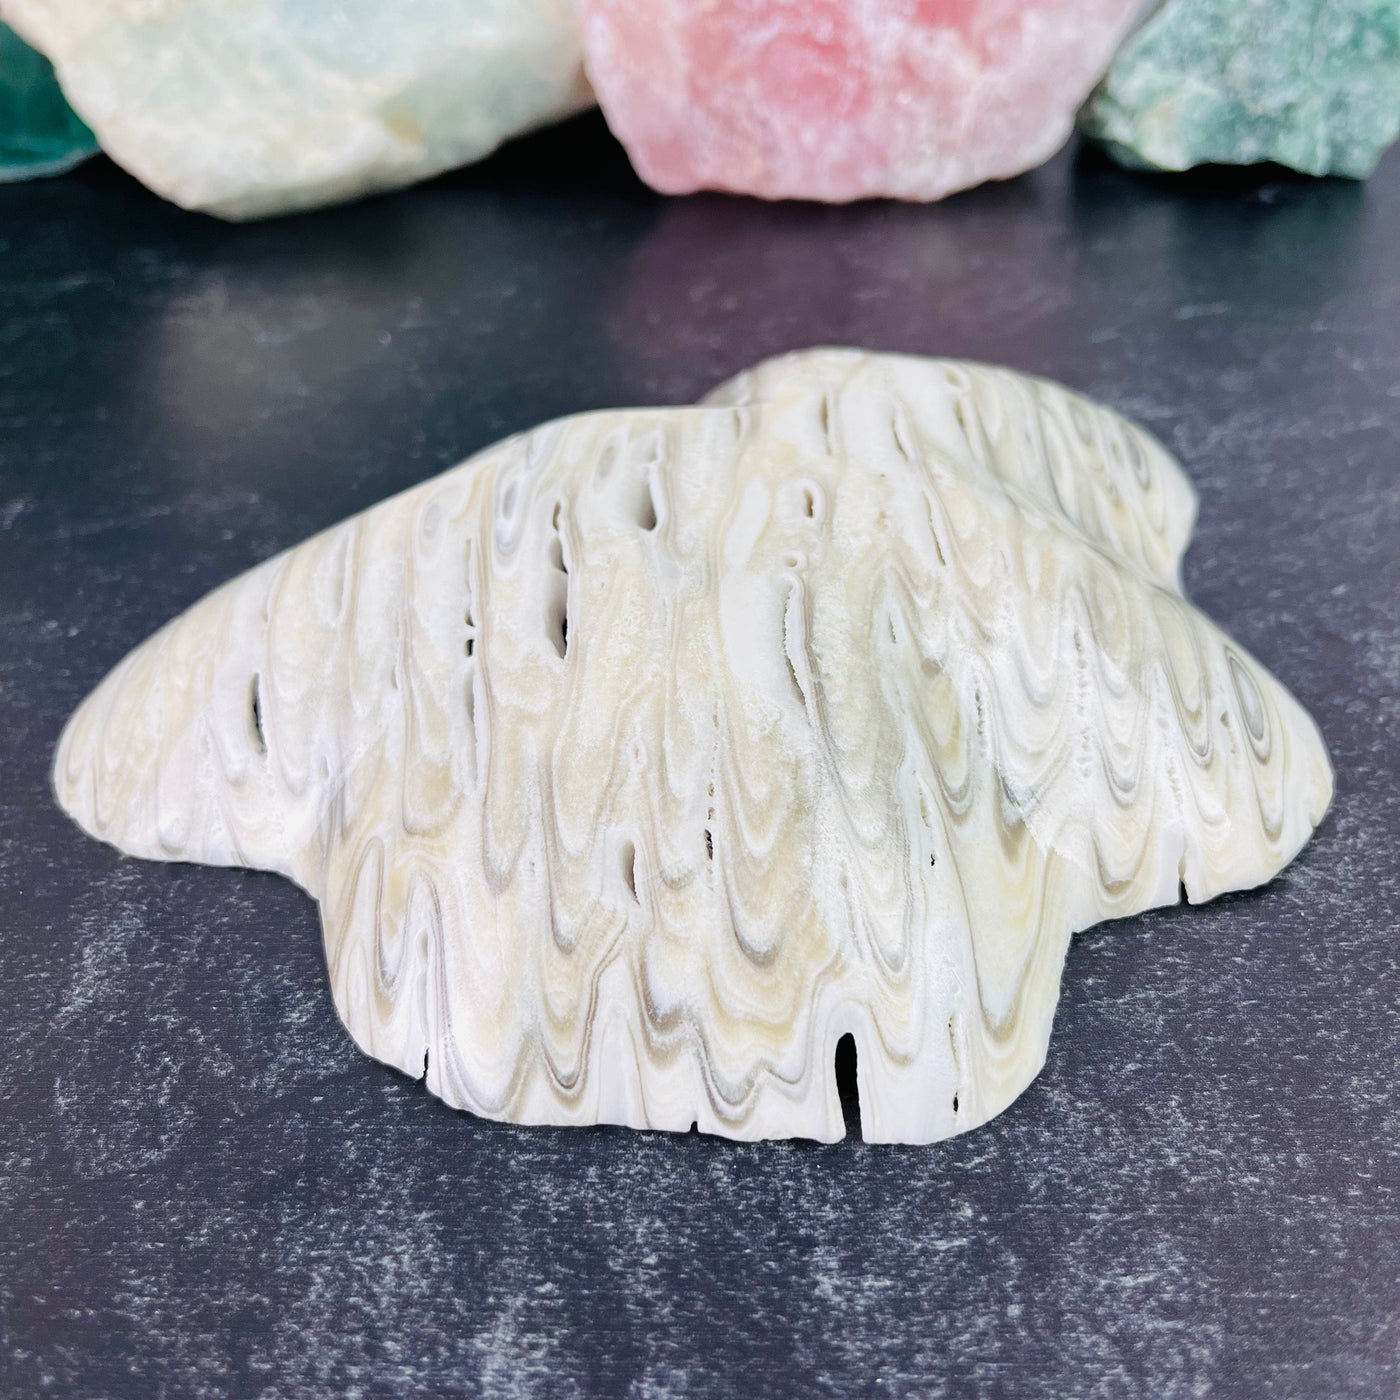 Mexican Patterned Onyx Freeform Bowl pictured lying on flat surface bottom up